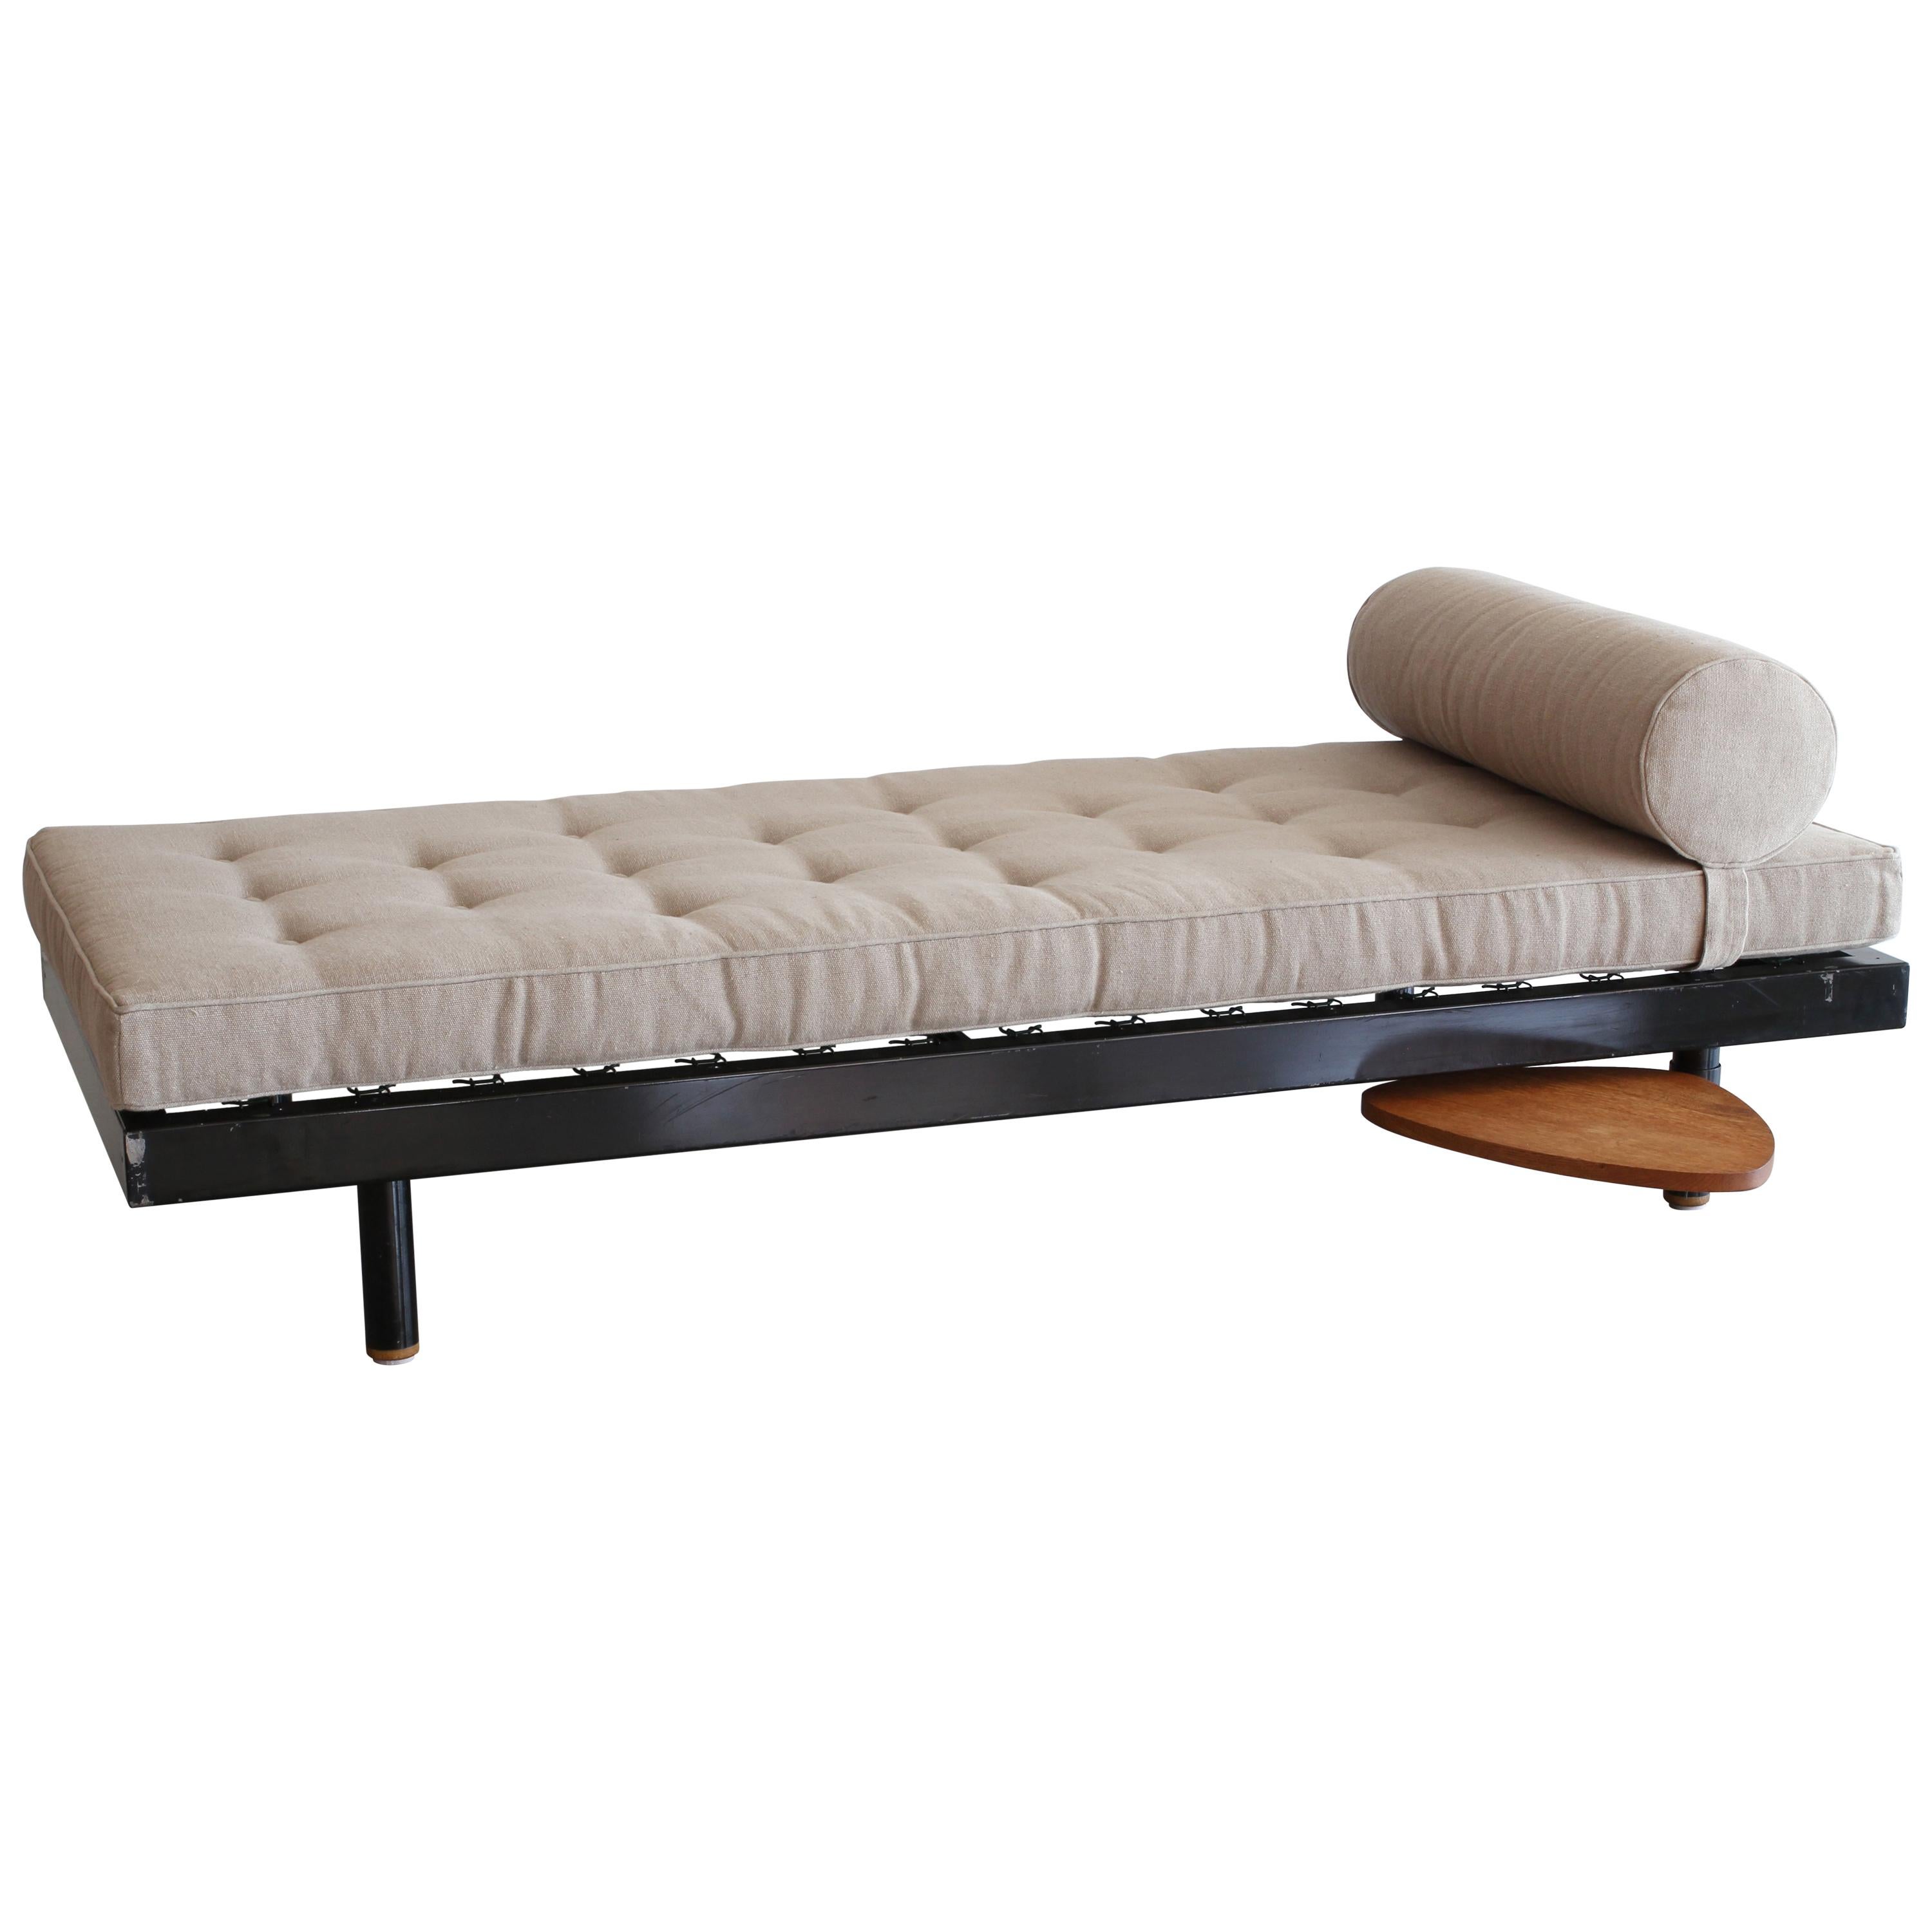 Antony Daybed by Jean Prouvé and Charlotte Perriand, 1950s